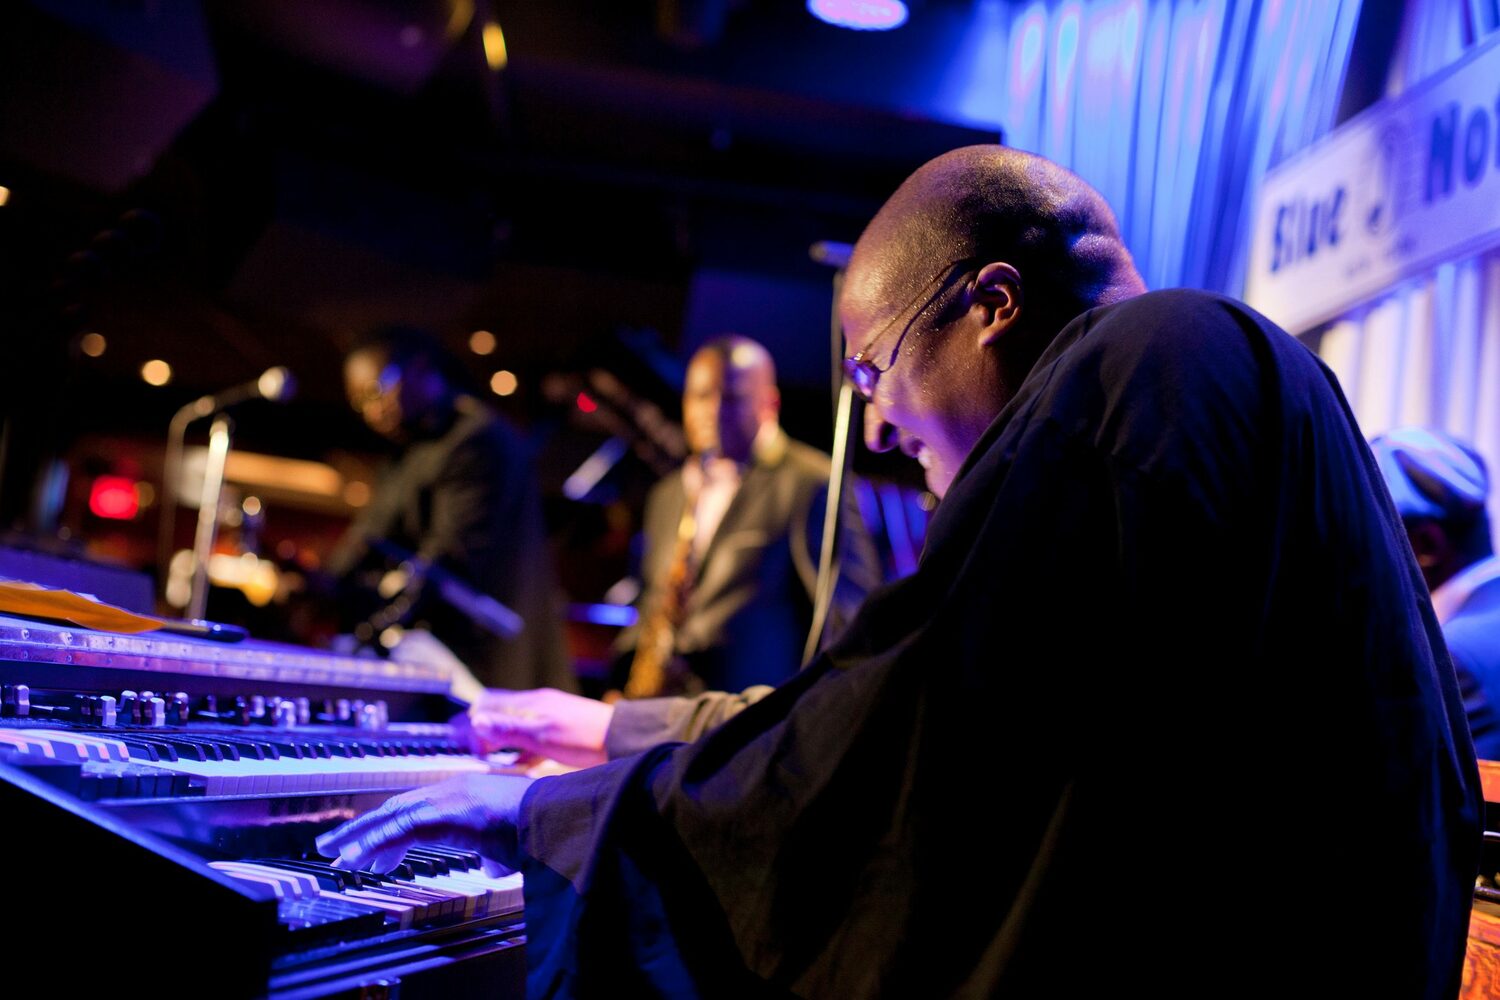 Jazz musician Gregory Lewis performs on the Hammond organ at the Blue Note in New York City. COURTESY THE ARTIST